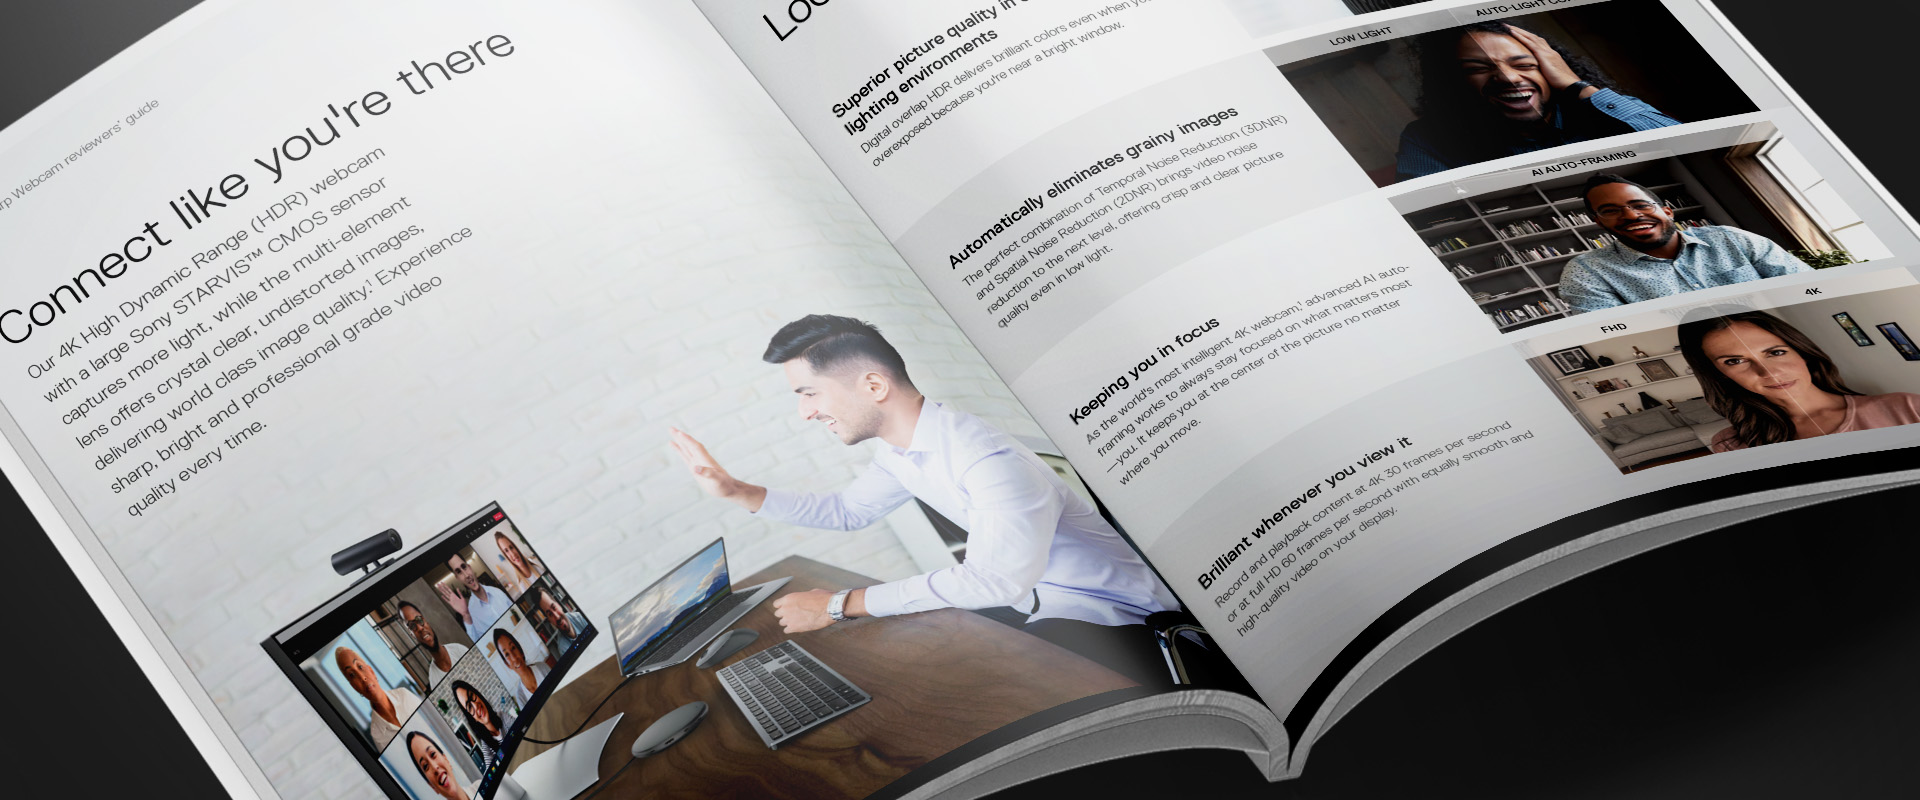 An interior spread of the product brochure for Dell UltraSharp Webcam.